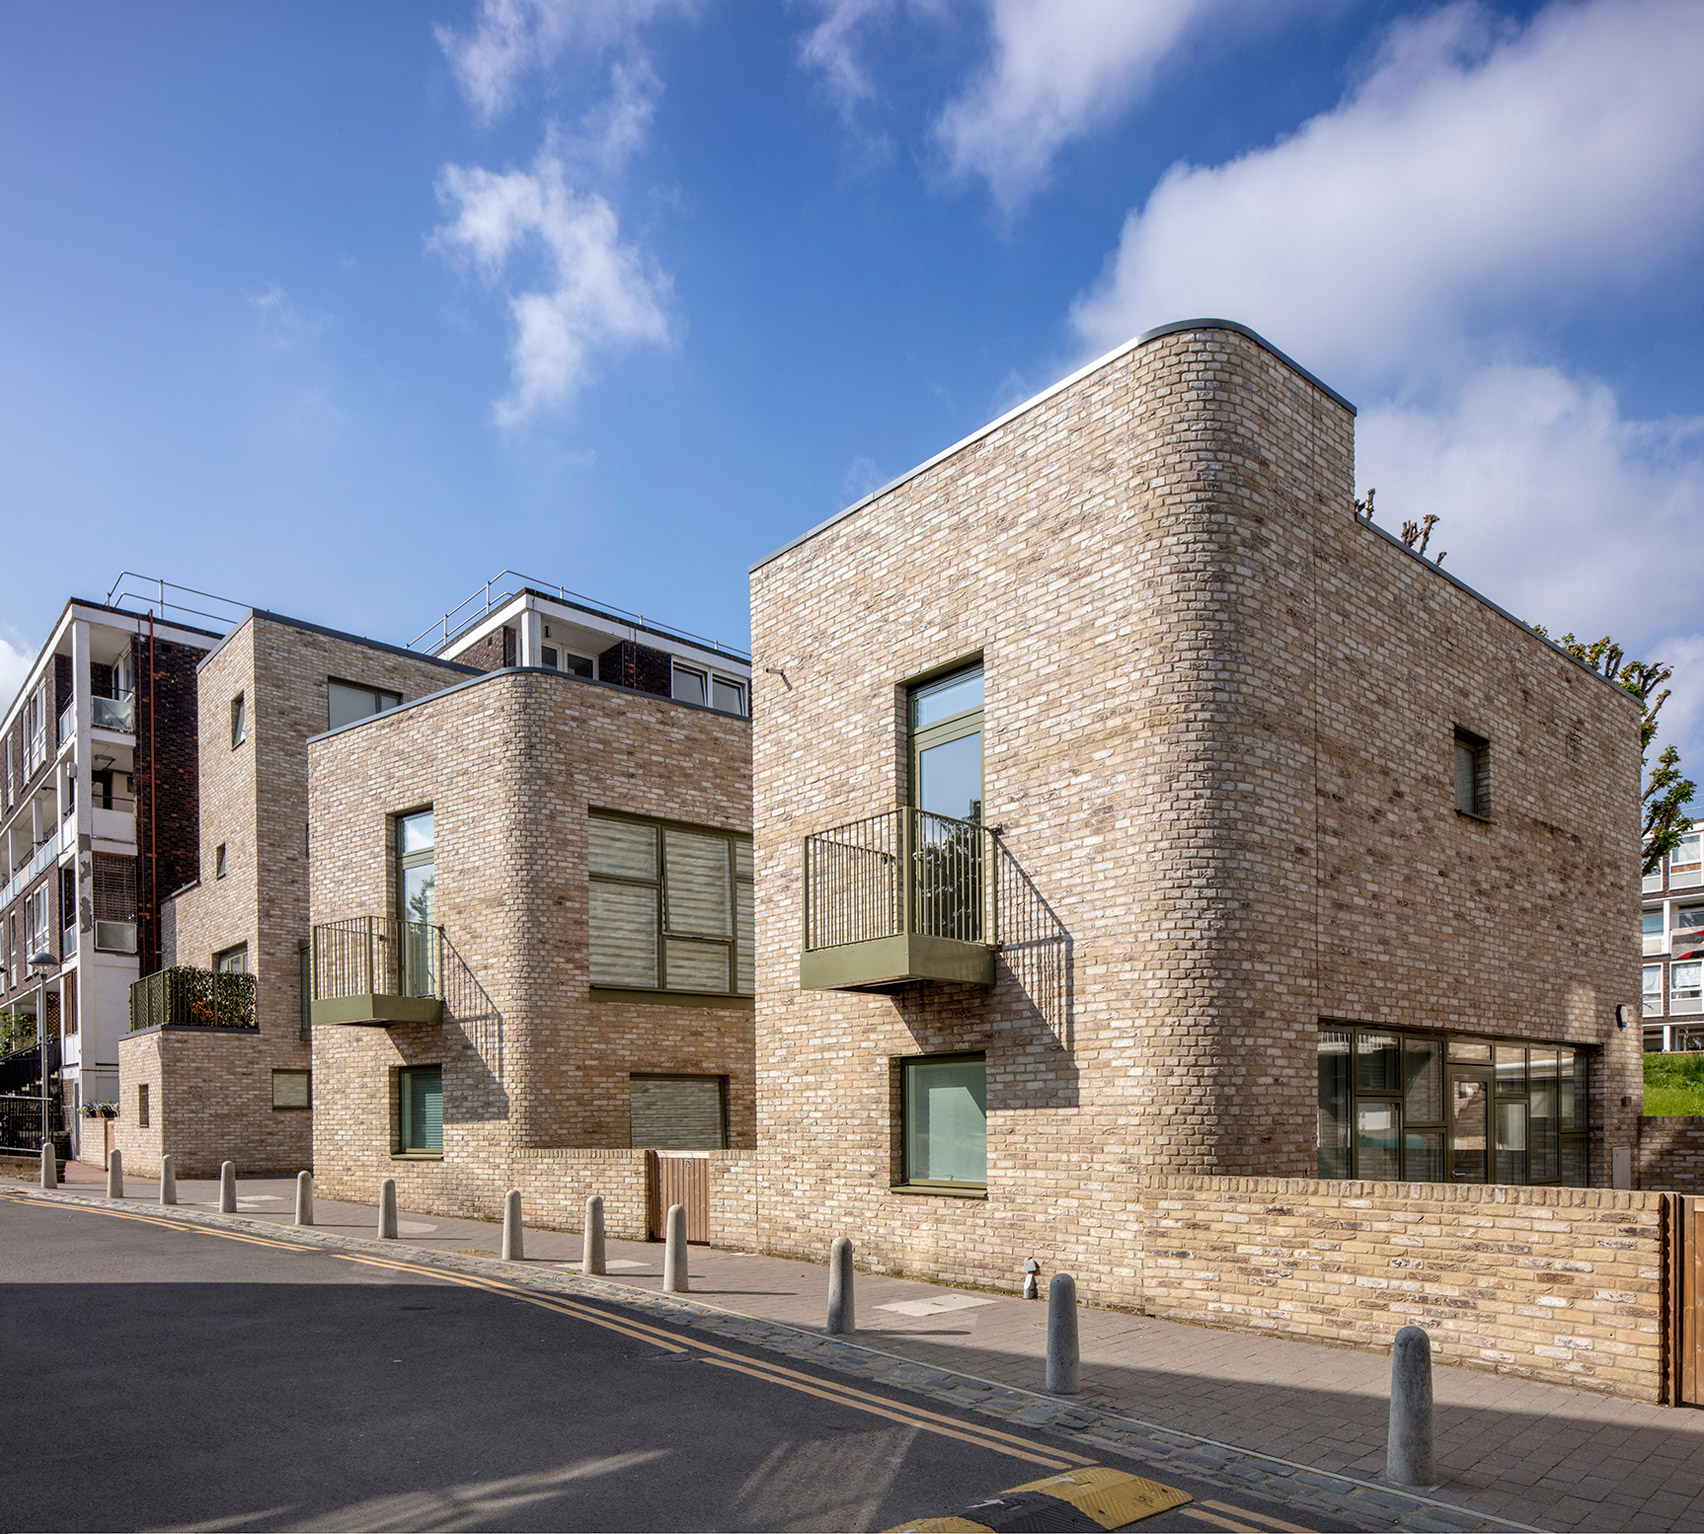 Image of two detached homes at Kiln Place was nominated for the Neave Brown Award for Housing